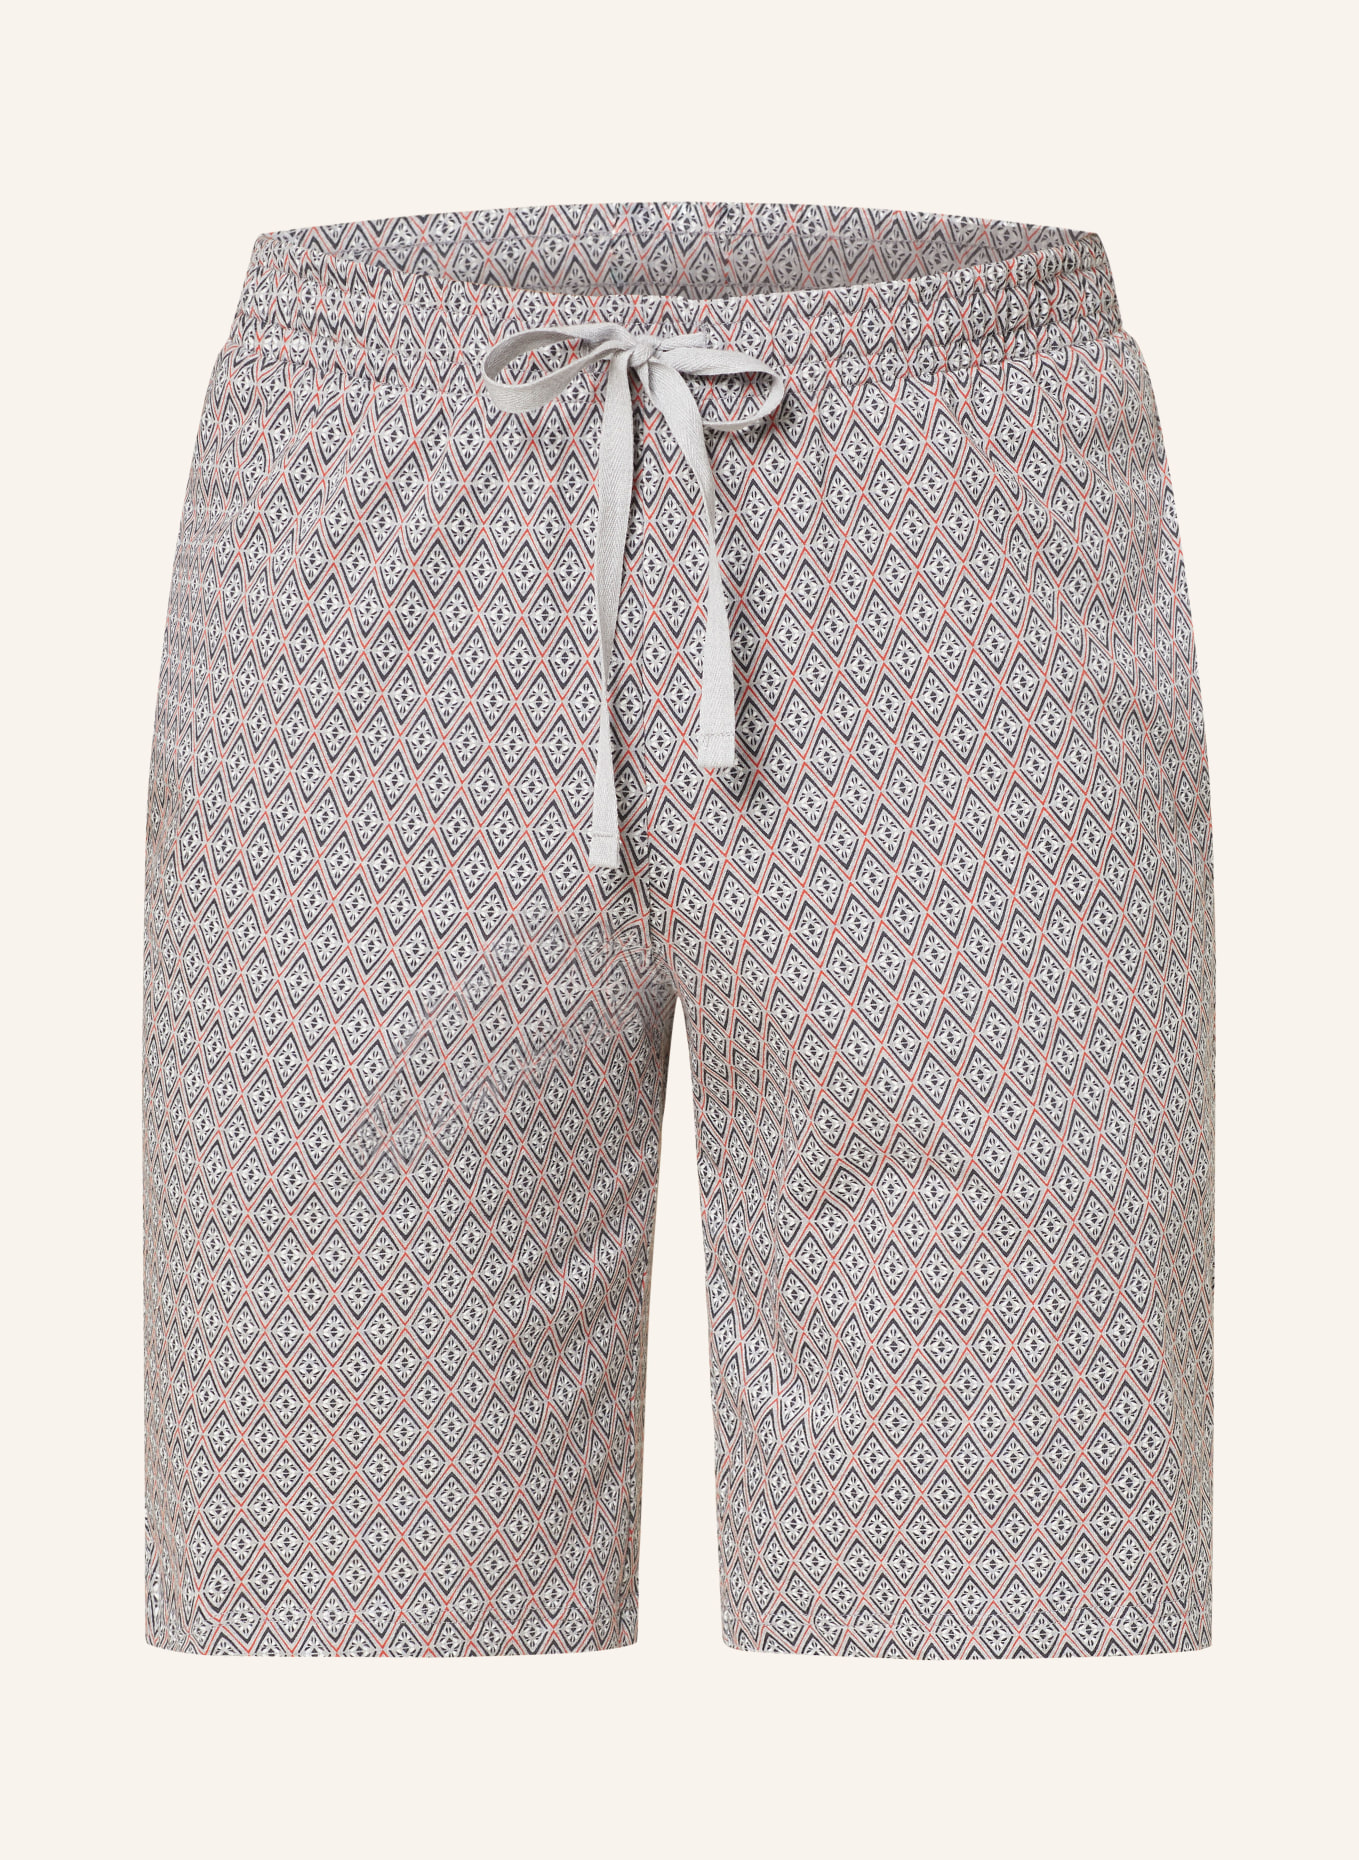 SCHIESSER Pajama shorts MIX + RELAX, Color: GRAY/ DARK GRAY/ RED (Image 1)